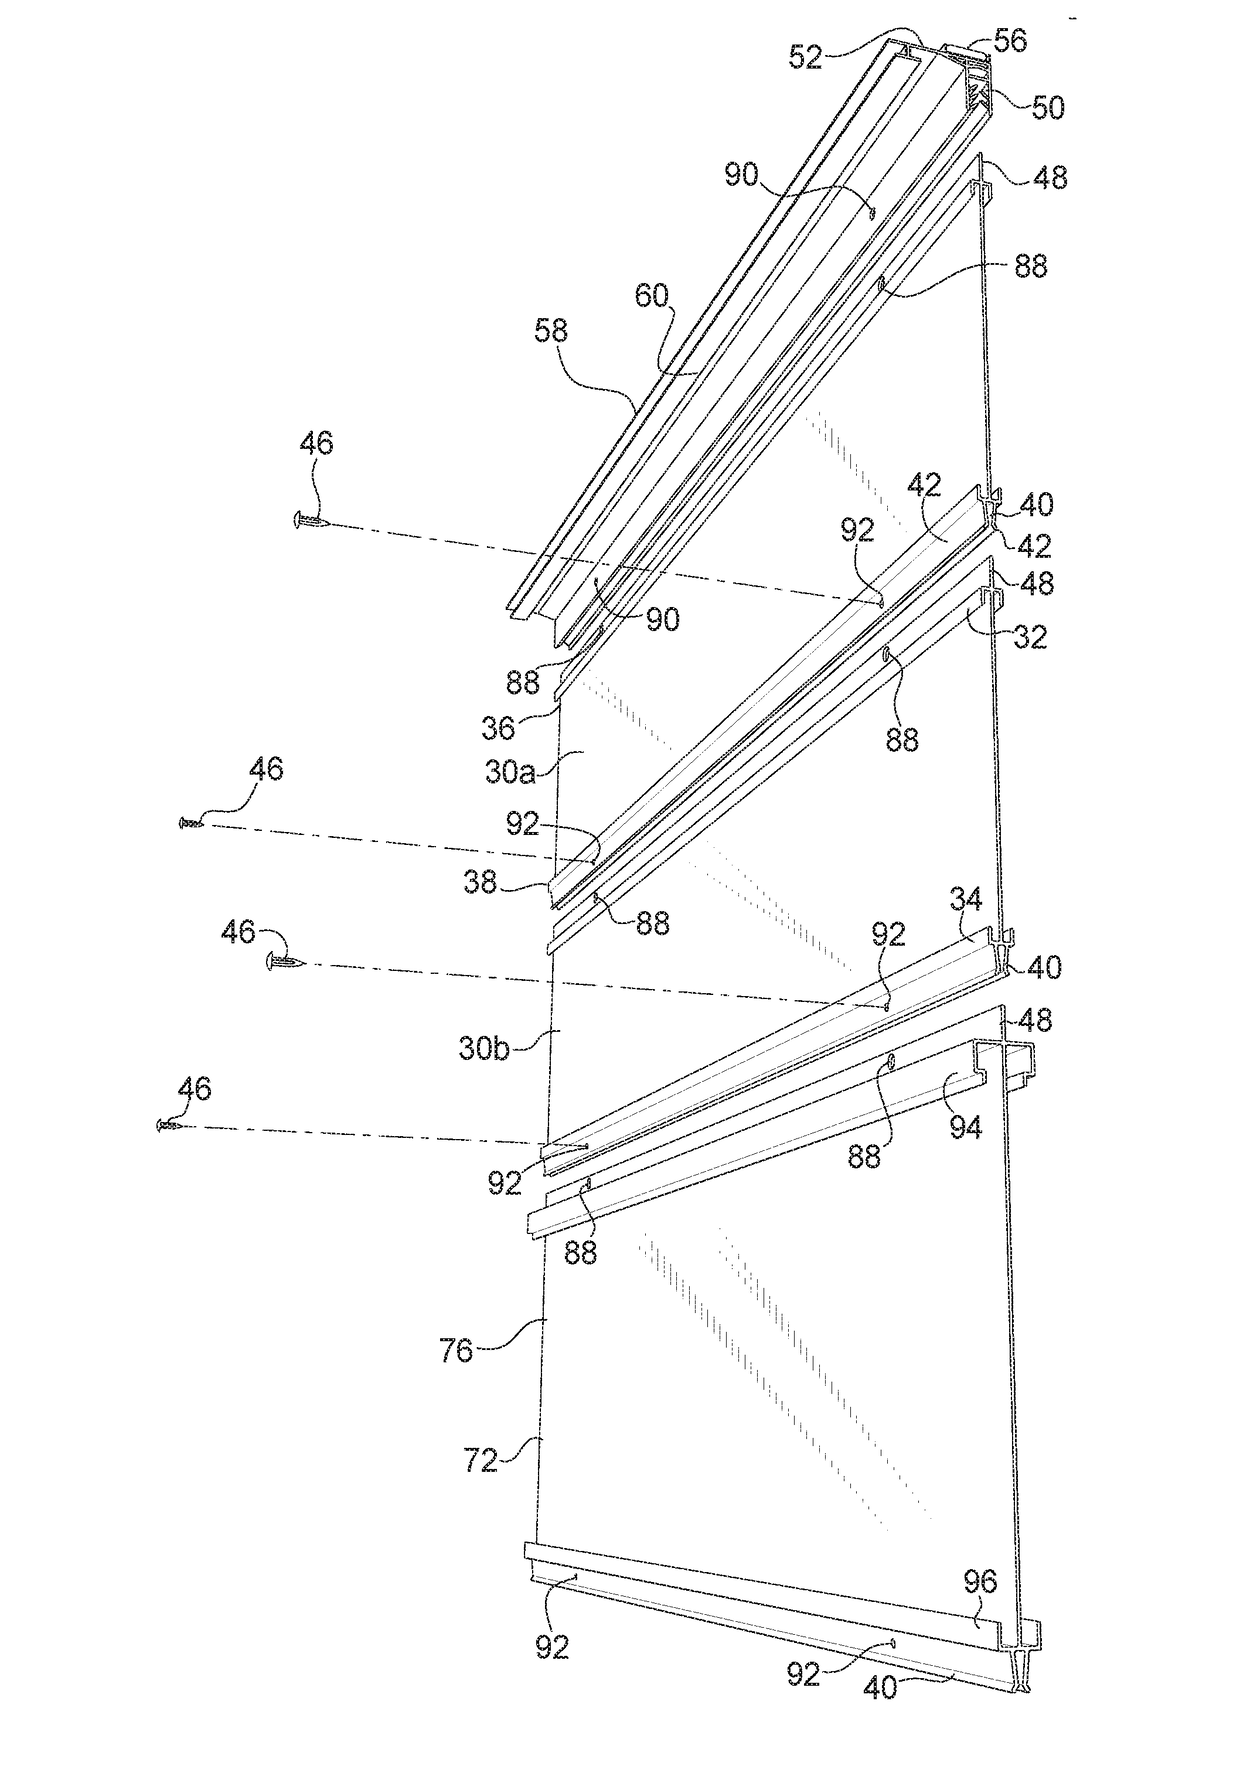 Modular flush-mount sign channel track system and method